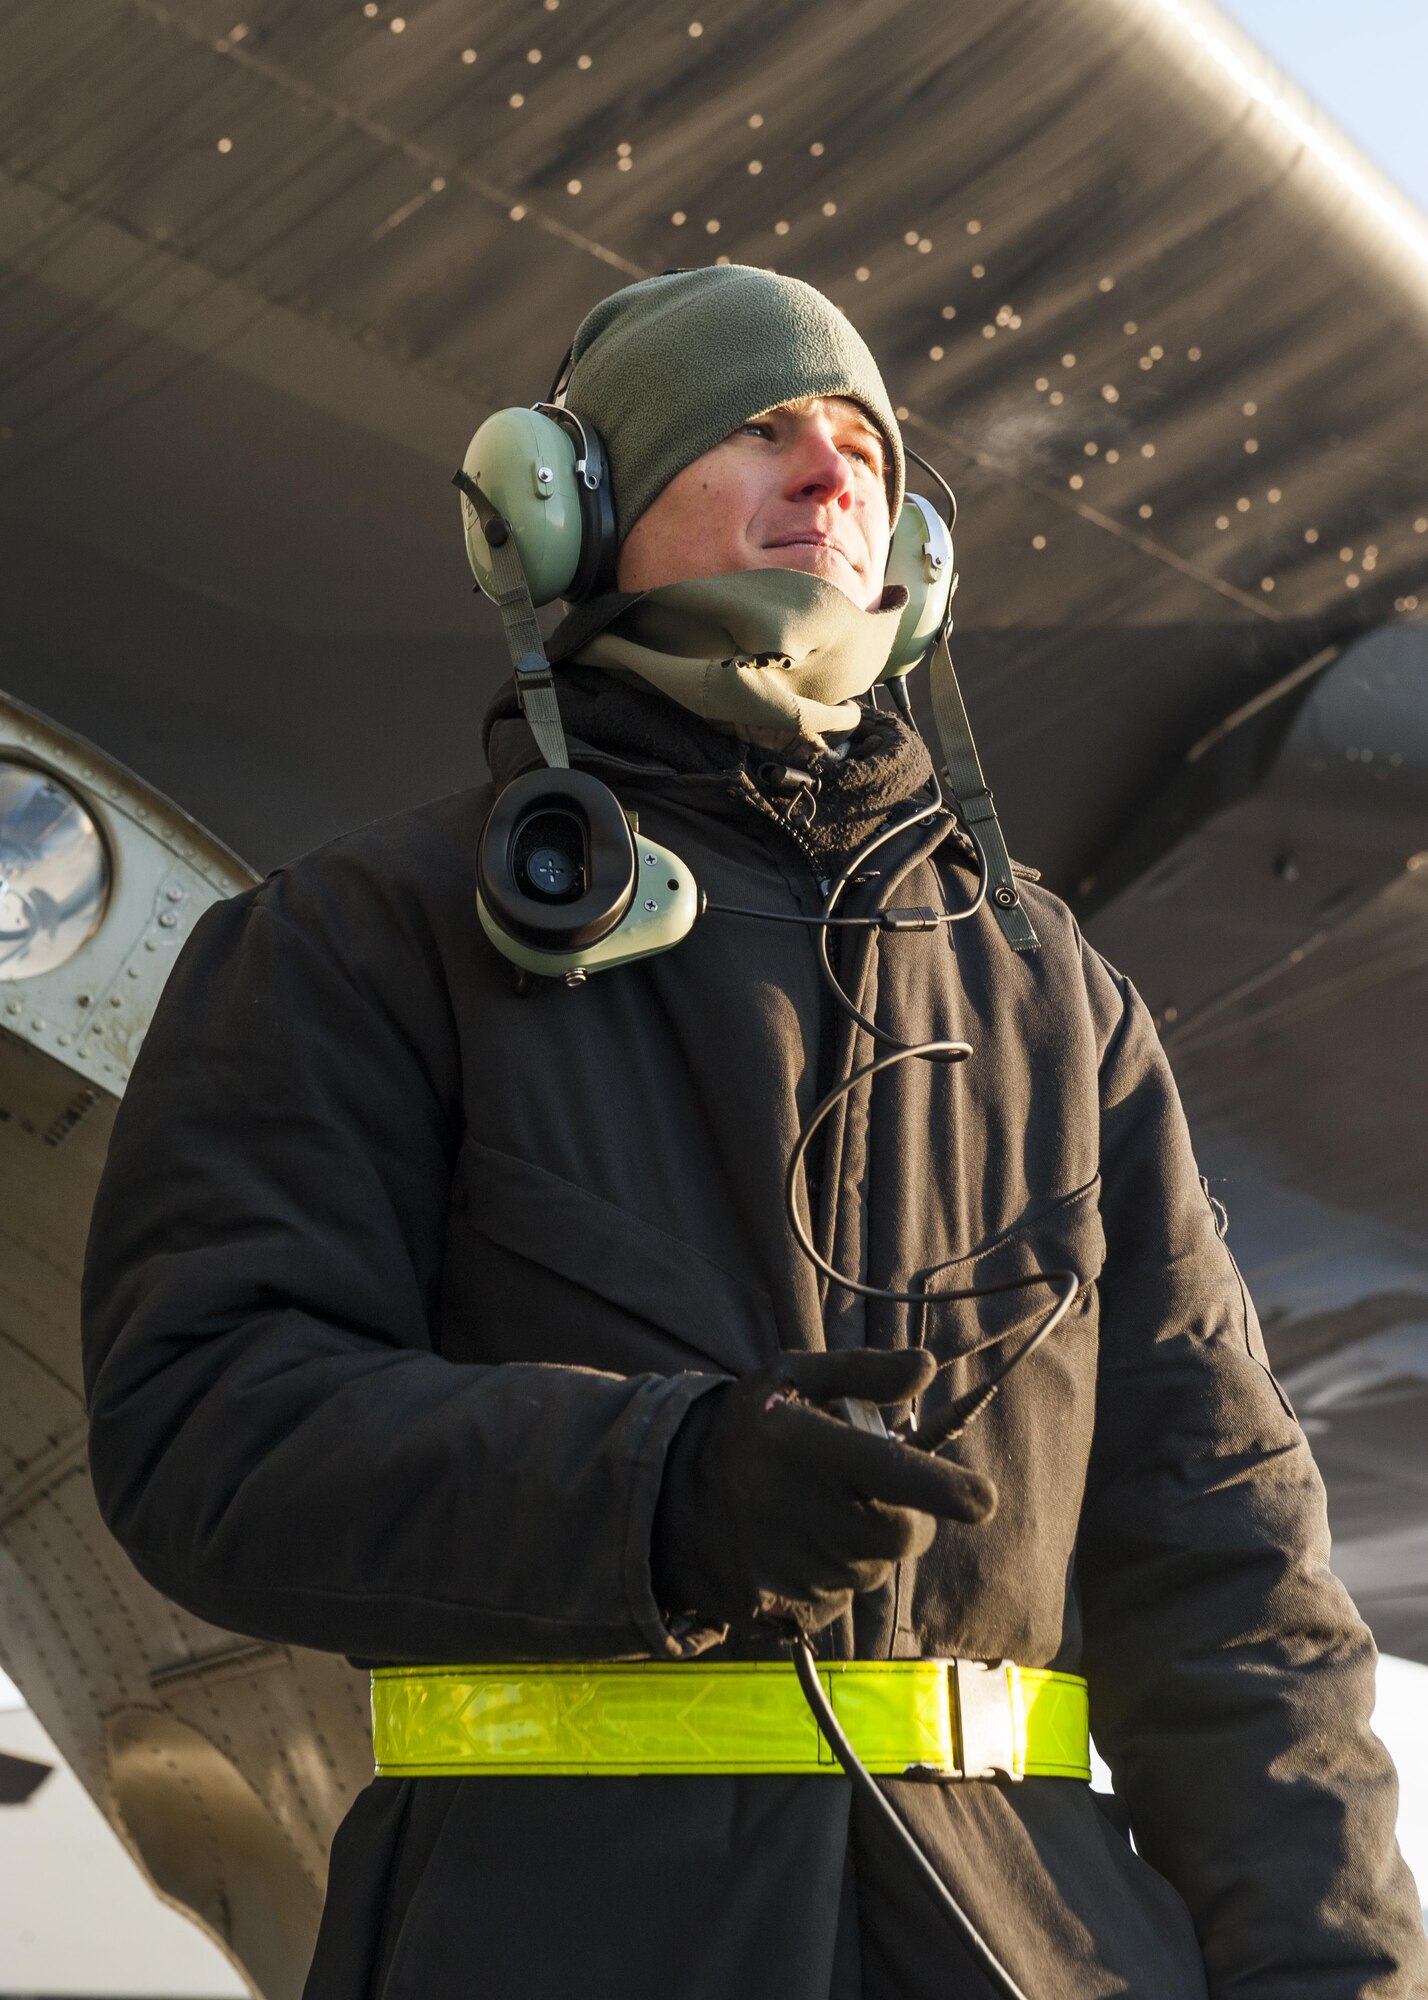 Senior Airman Josh Serafin, 5th Aircraft Maintenance Squadron crew chief, communicates with the aircrew aboard a B-52H Stratofortress prior to launch at Minot Air Force Base, N.D., Jan. 26, 2017. Communication between the aircrew aboard the aircraft and the maintainers outside, is critical to safely launching a B-52. (U.S. Air Force photo/Senior Airman J.T. Armstrong)